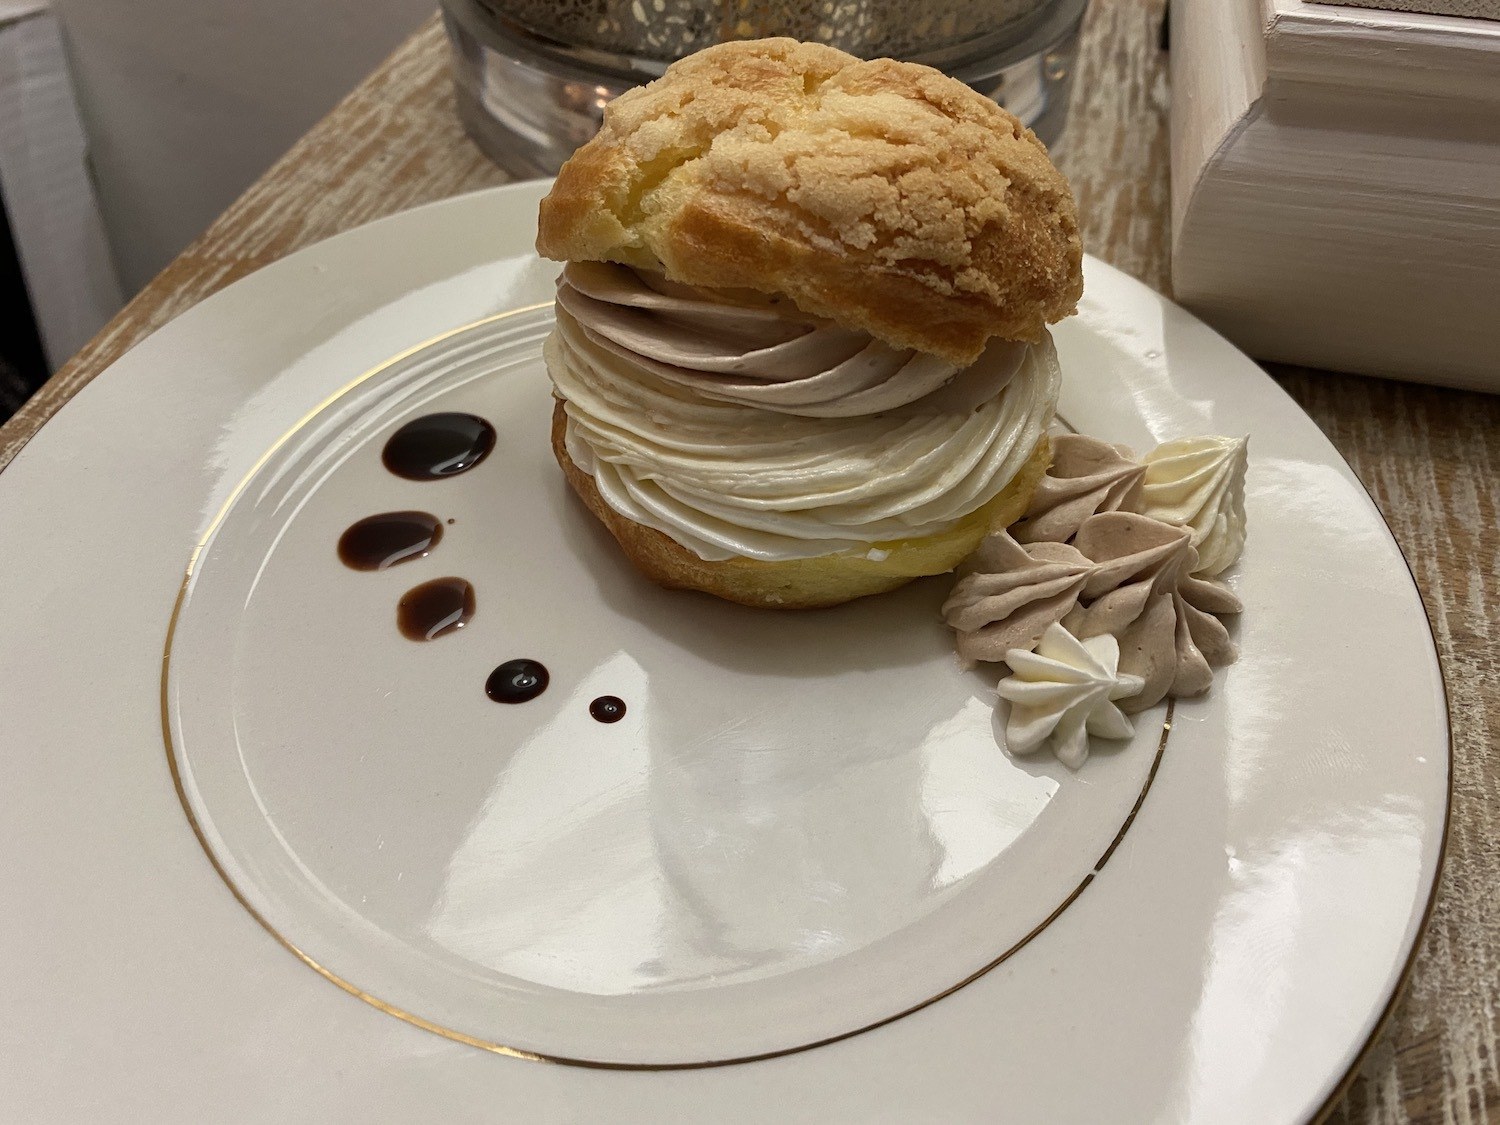 A pastry that Allec Cortez made for LATTC. December 2020